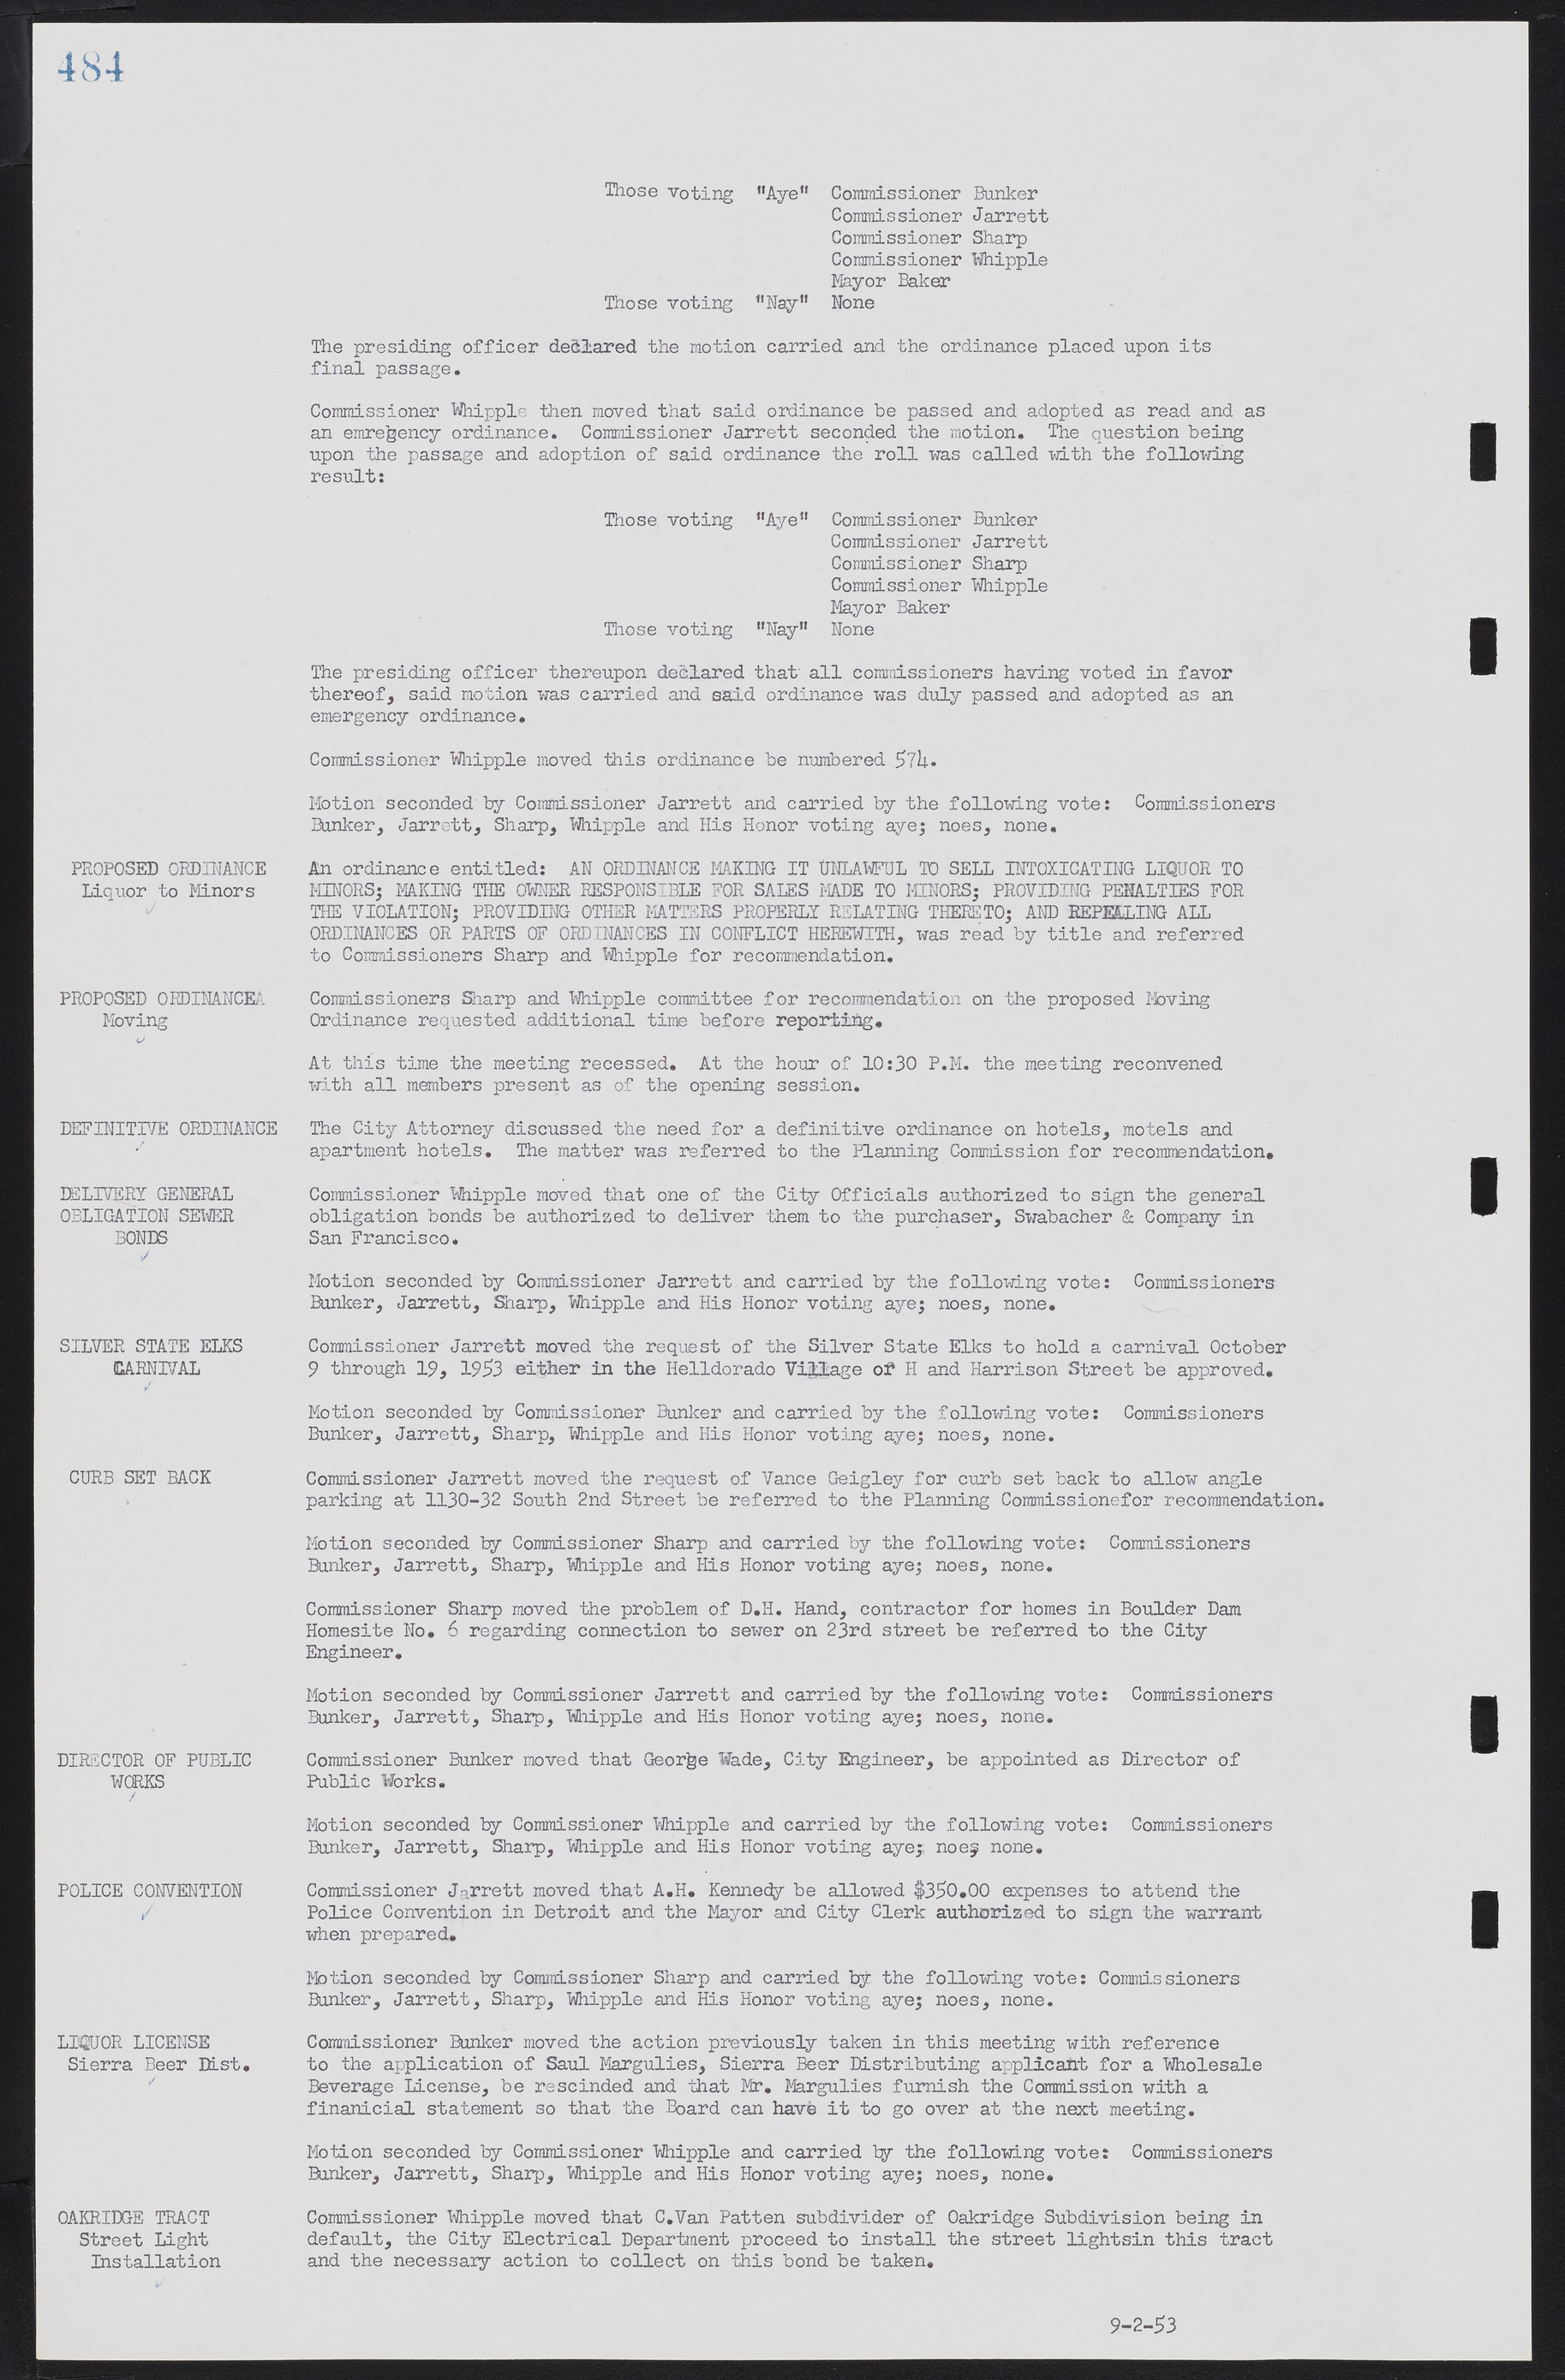 Las Vegas City Commission Minutes, May 26, 1952 to February 17, 1954, lvc000008-514